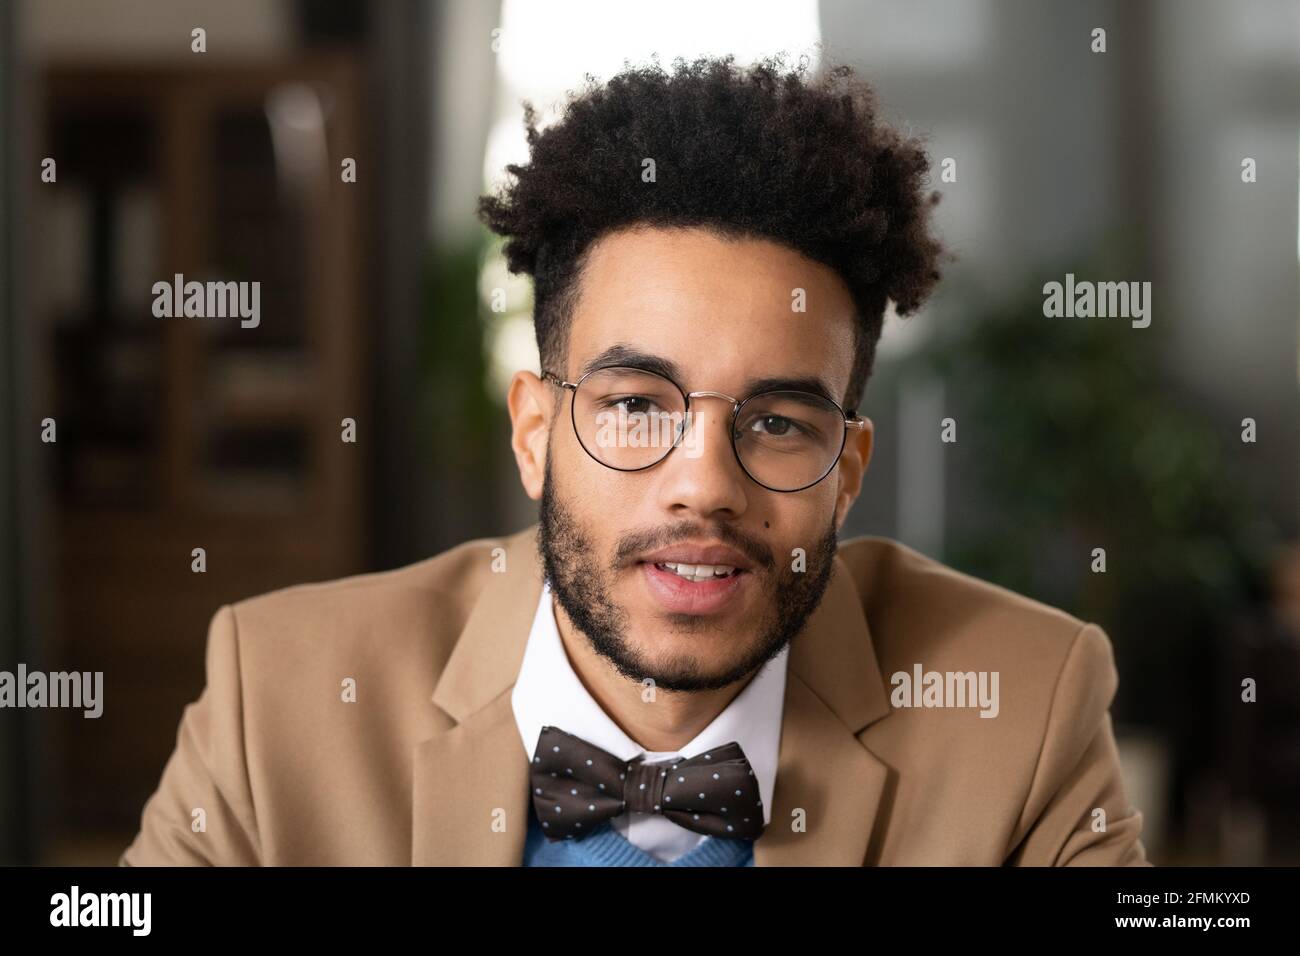 Portrait of positive handsome young black man with afro hairstyle wearing dotted bow tie and round-shaped glasses sitting in home office Stock Photo